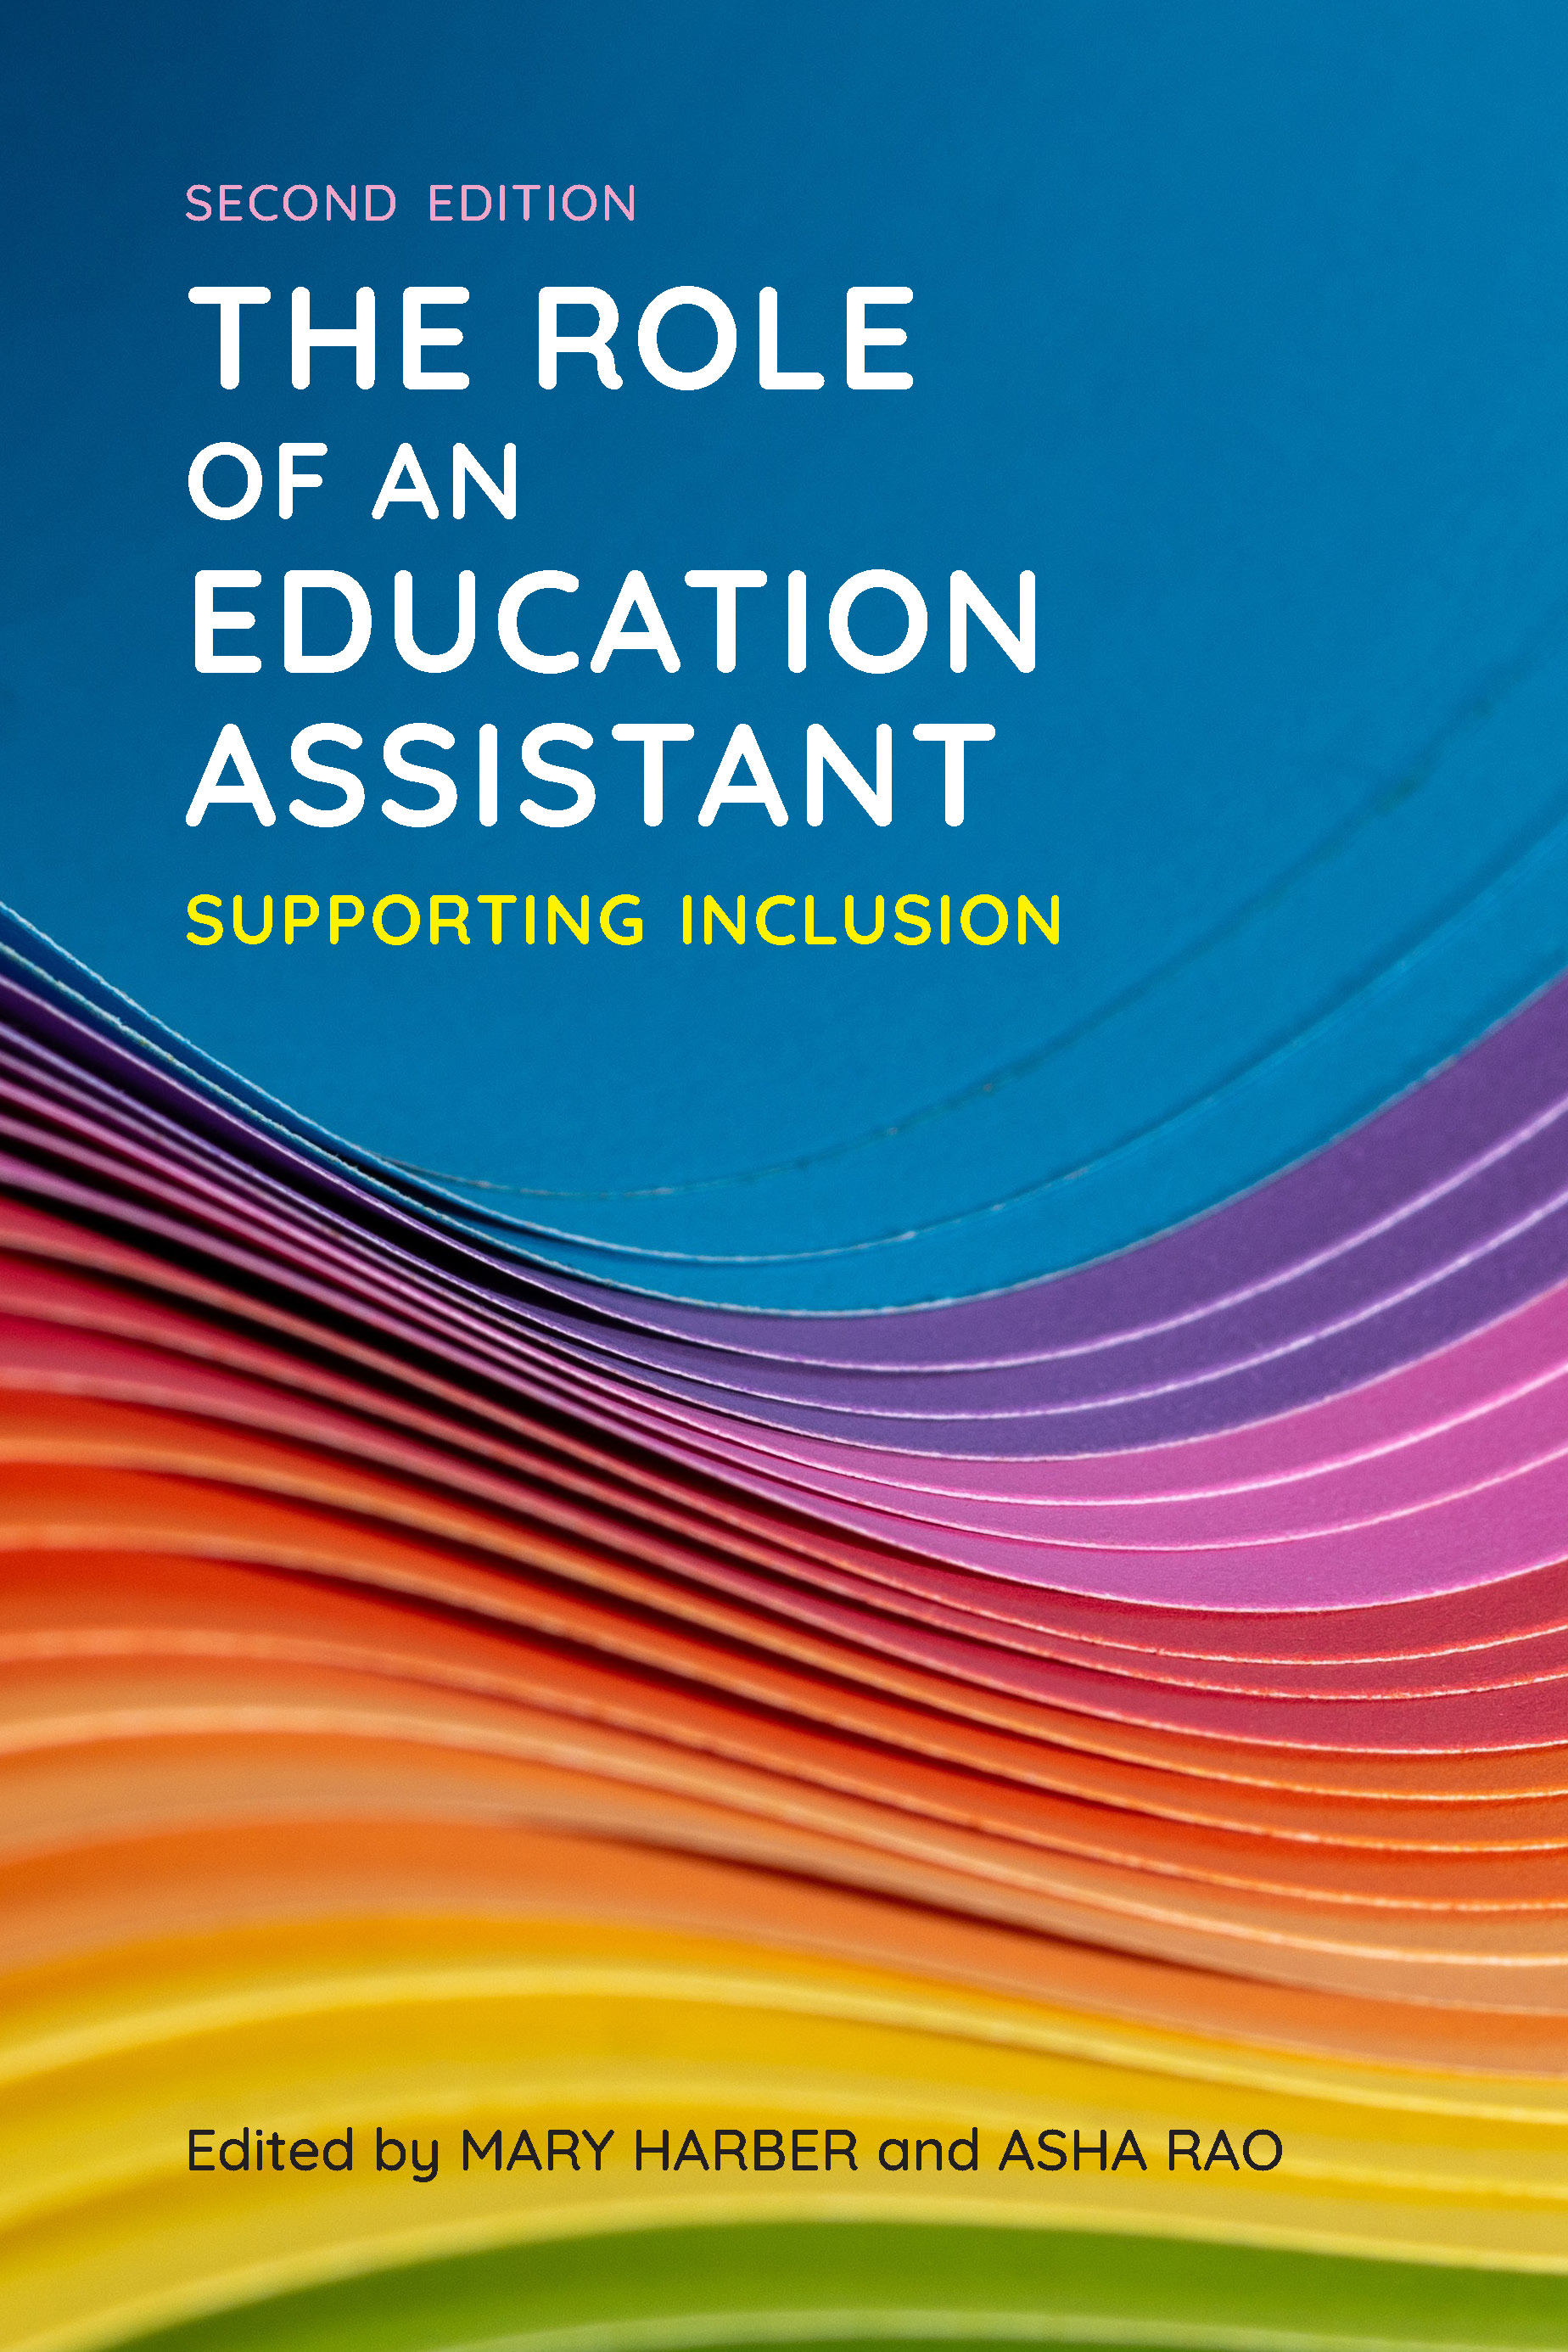 The Role of an Education Assistant, Second Edition